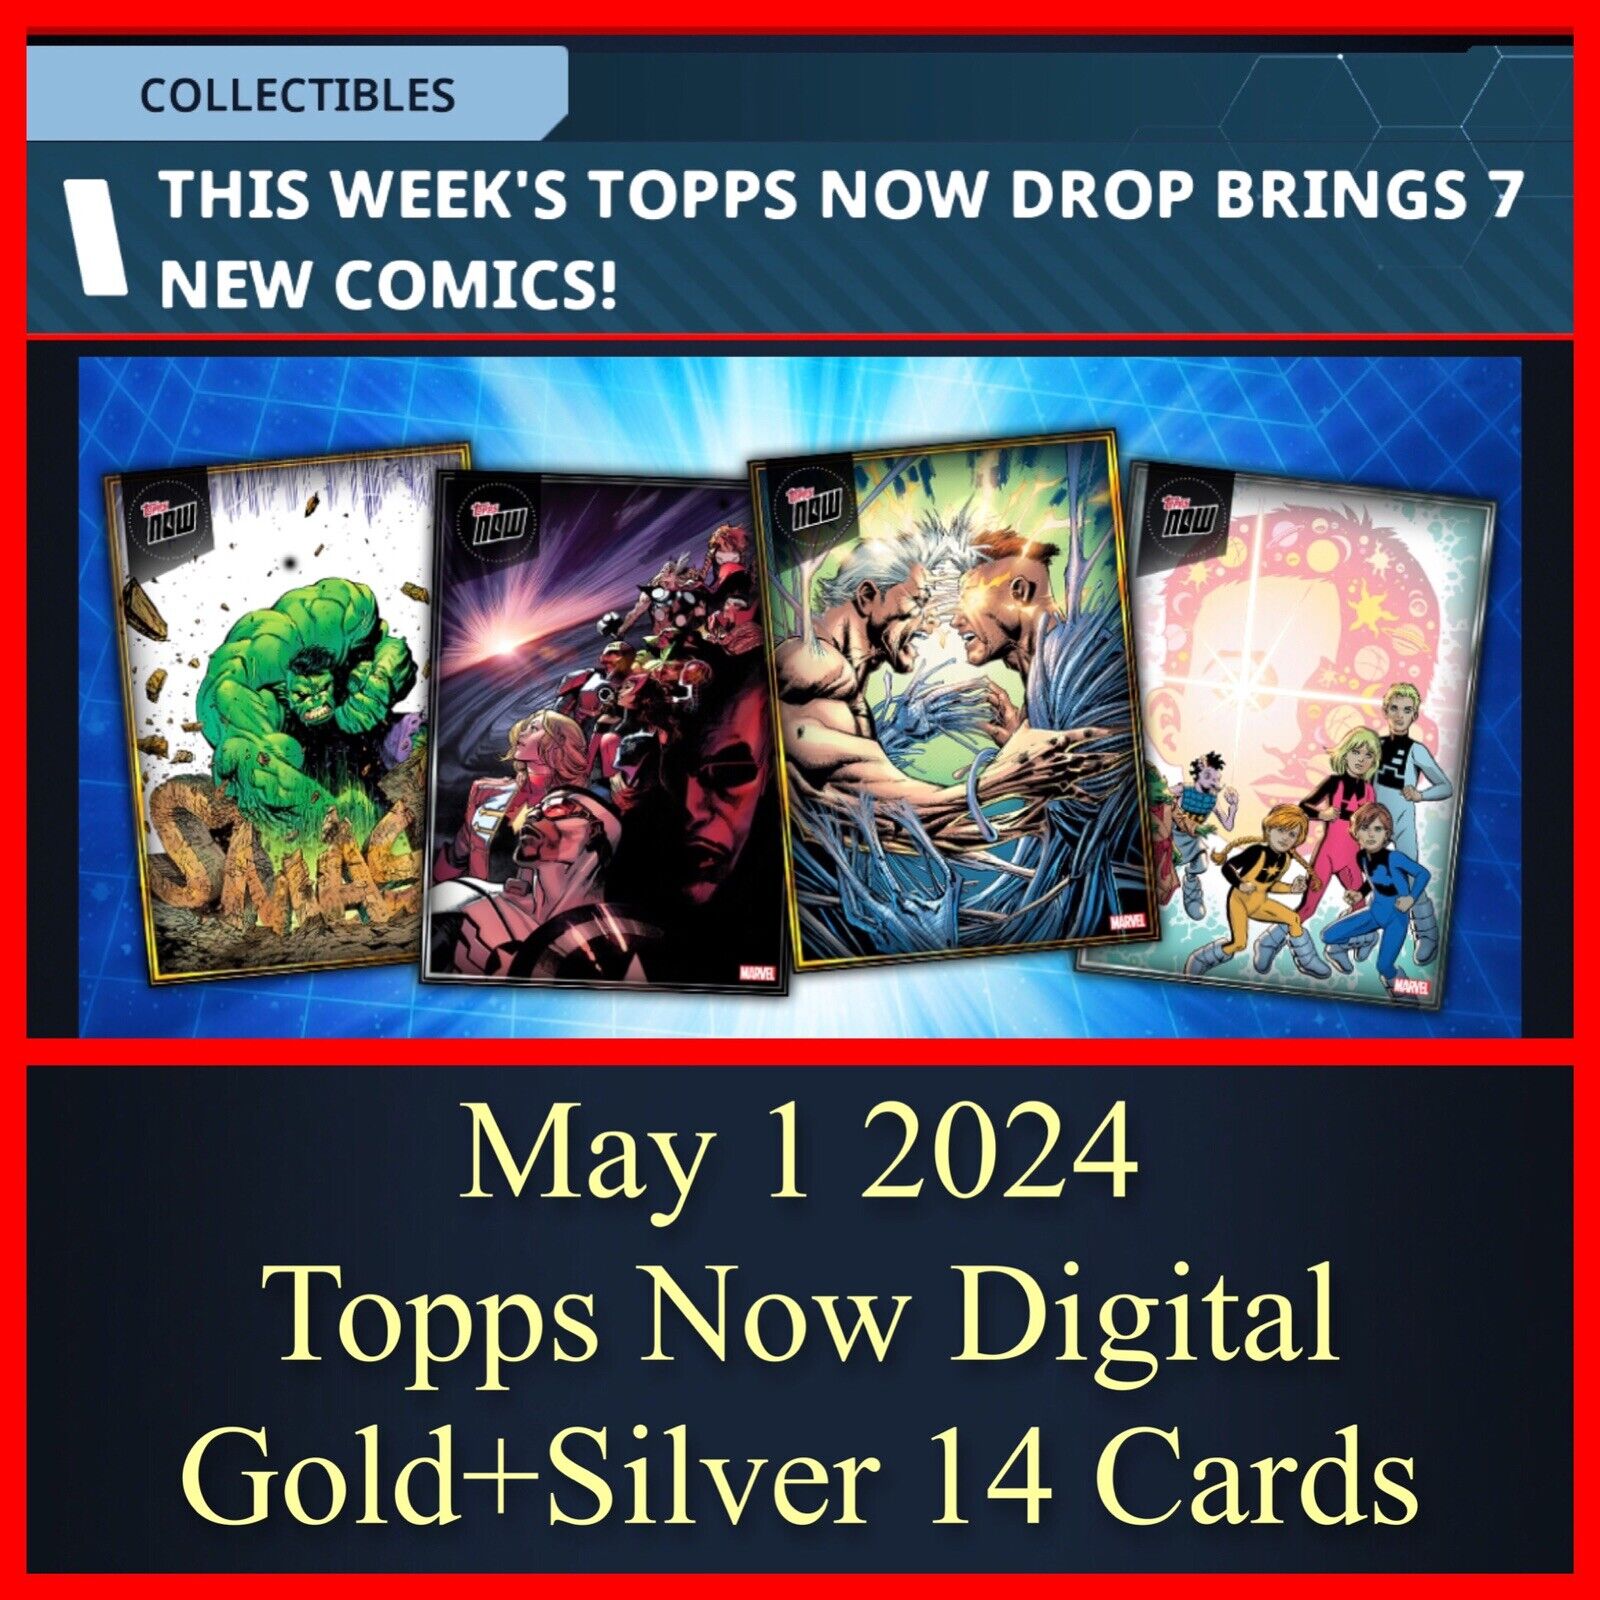 TOPPS MARVEL COLLECT TOPPS NOW MAY 1 2024 GOLD+SILVER 14 CARD SET